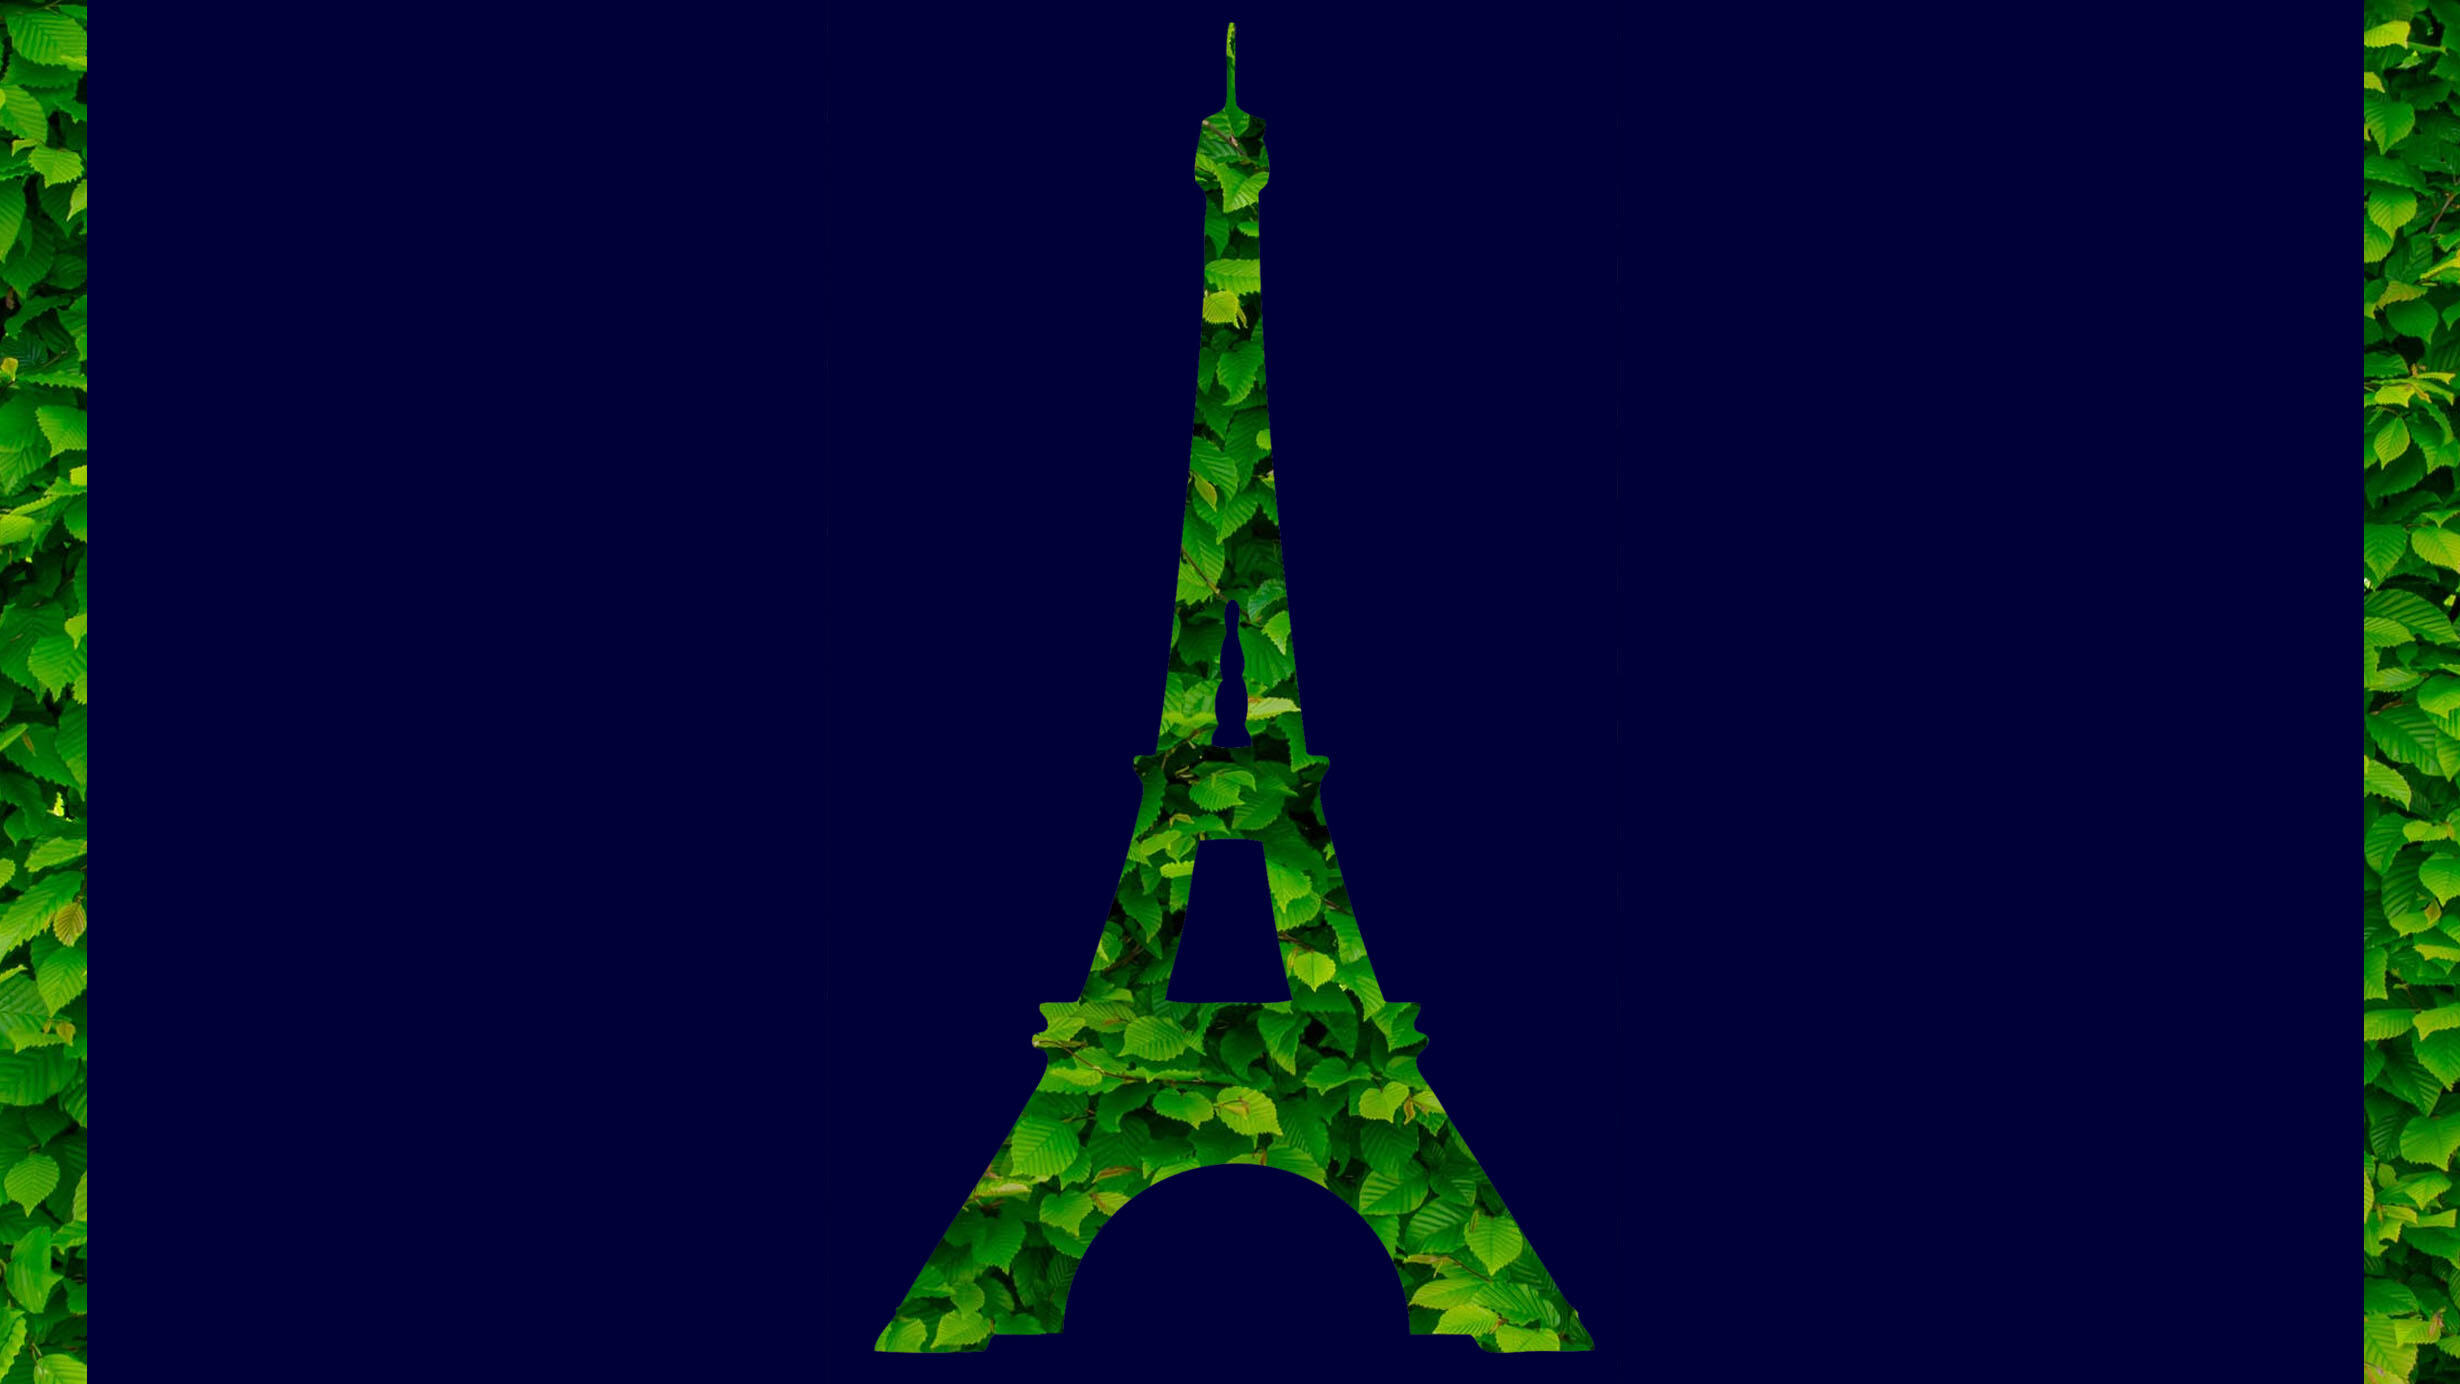 Illustration depicts green leaves in the shape of the Eiffel Tower.